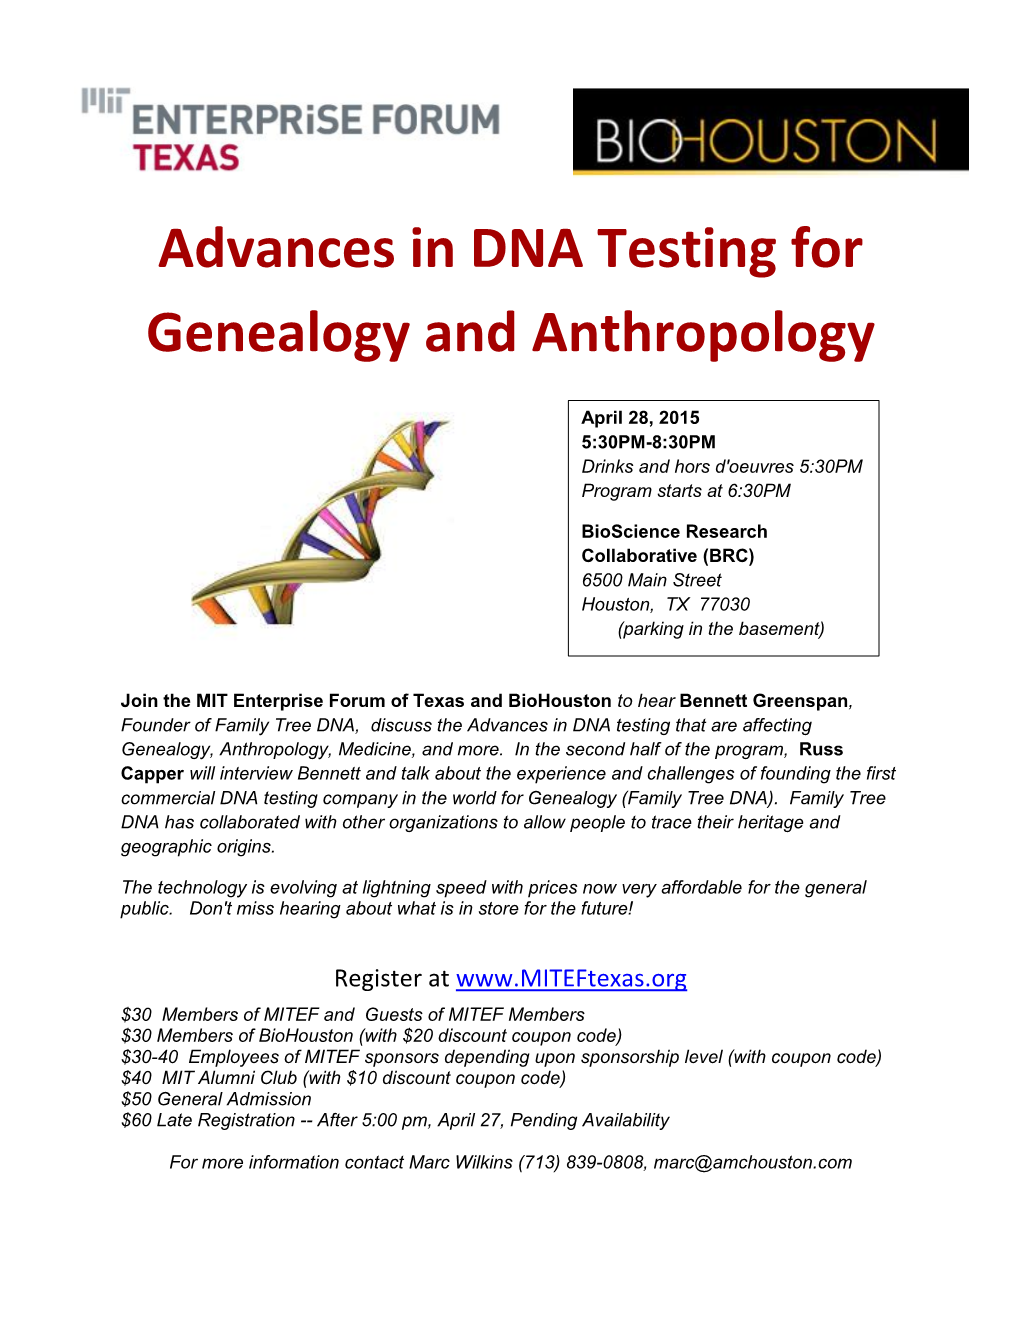 Advances in DNA Testing for Genealogy and Anthropology